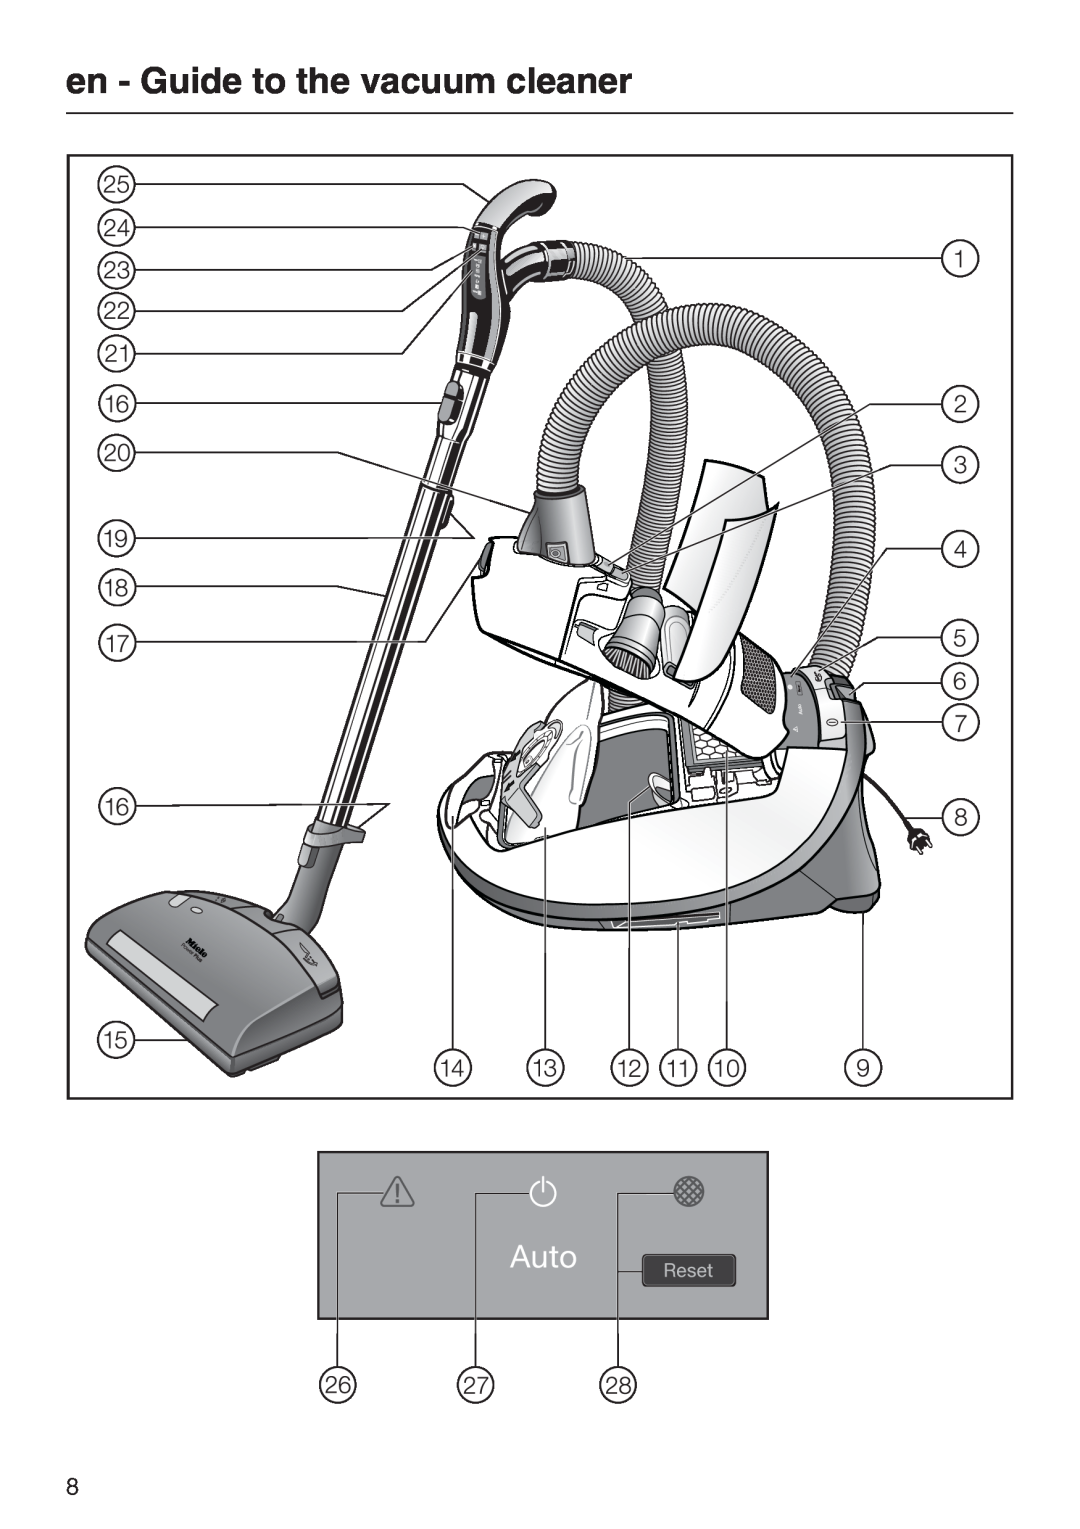 Miele S 8900 manual en - Guide to the vacuum cleaner 